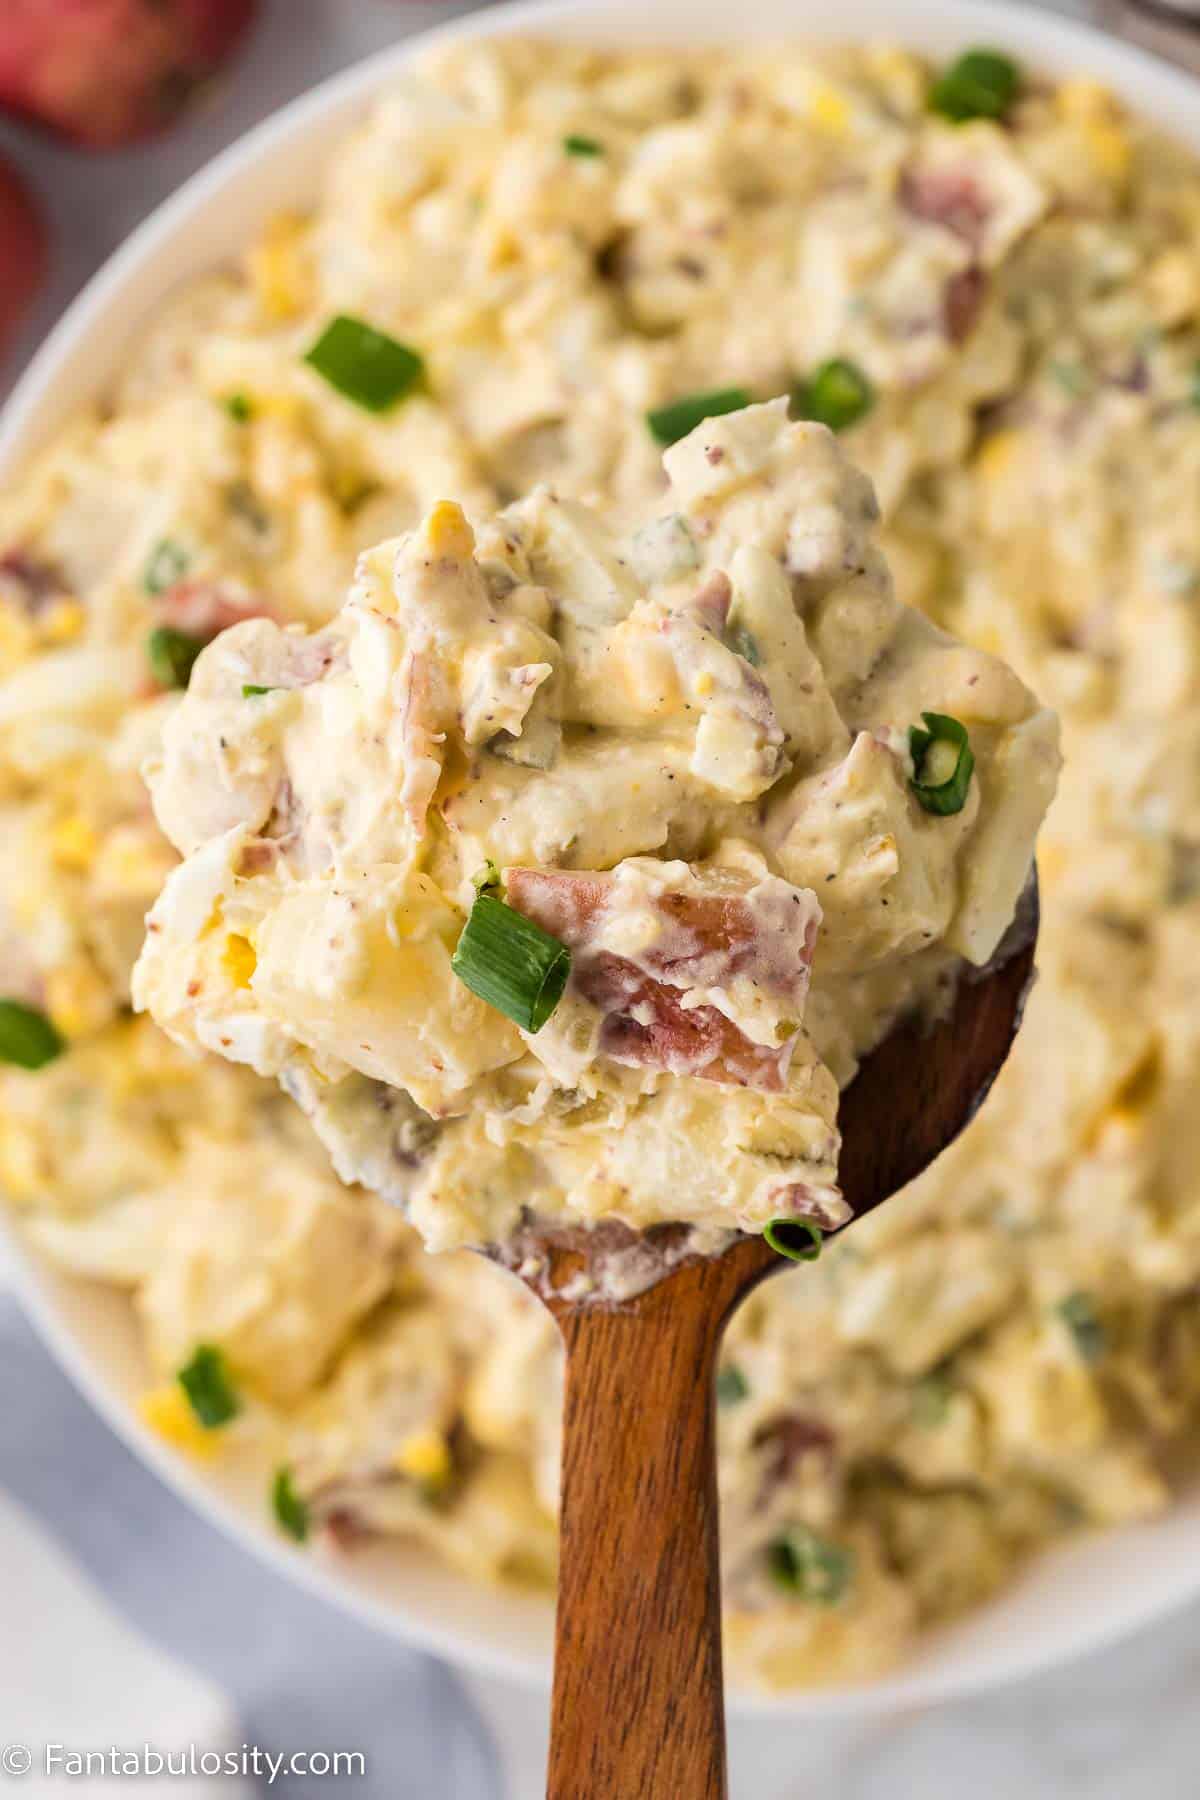 Wooden spoon holding serving of red skin potato salad.